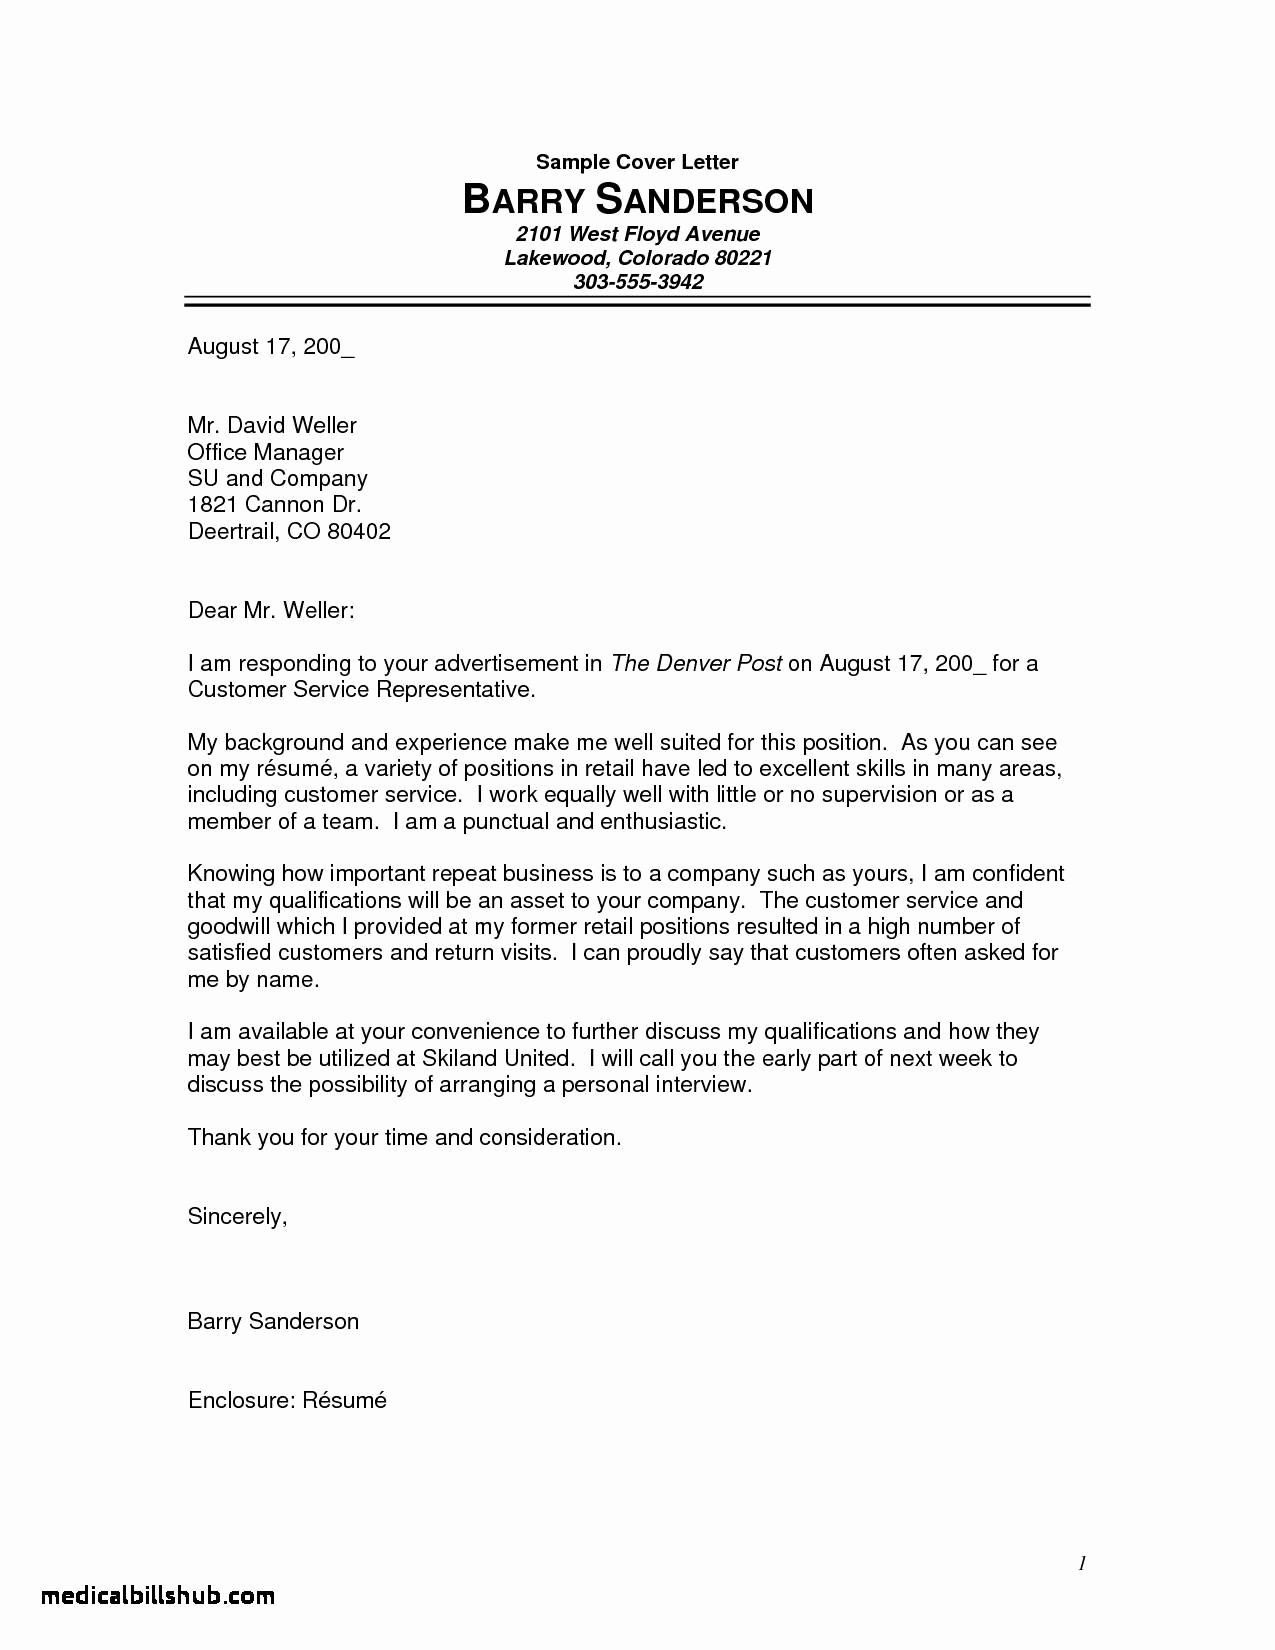 15 medical assistant cover letter no experience